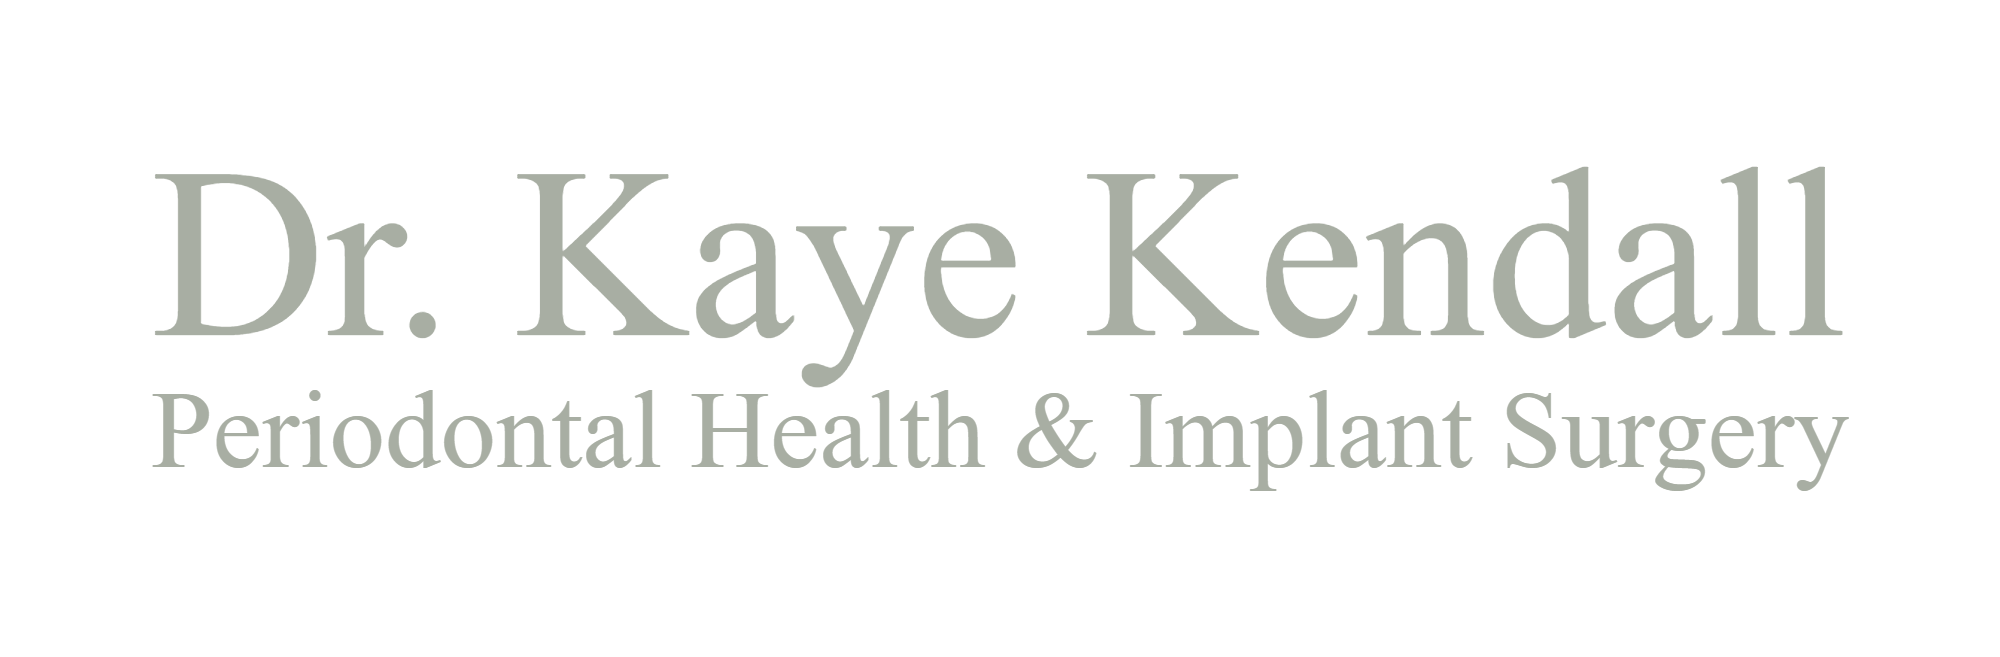 Dr. Kaye Kendall Periodontal Health and Implant Surgery